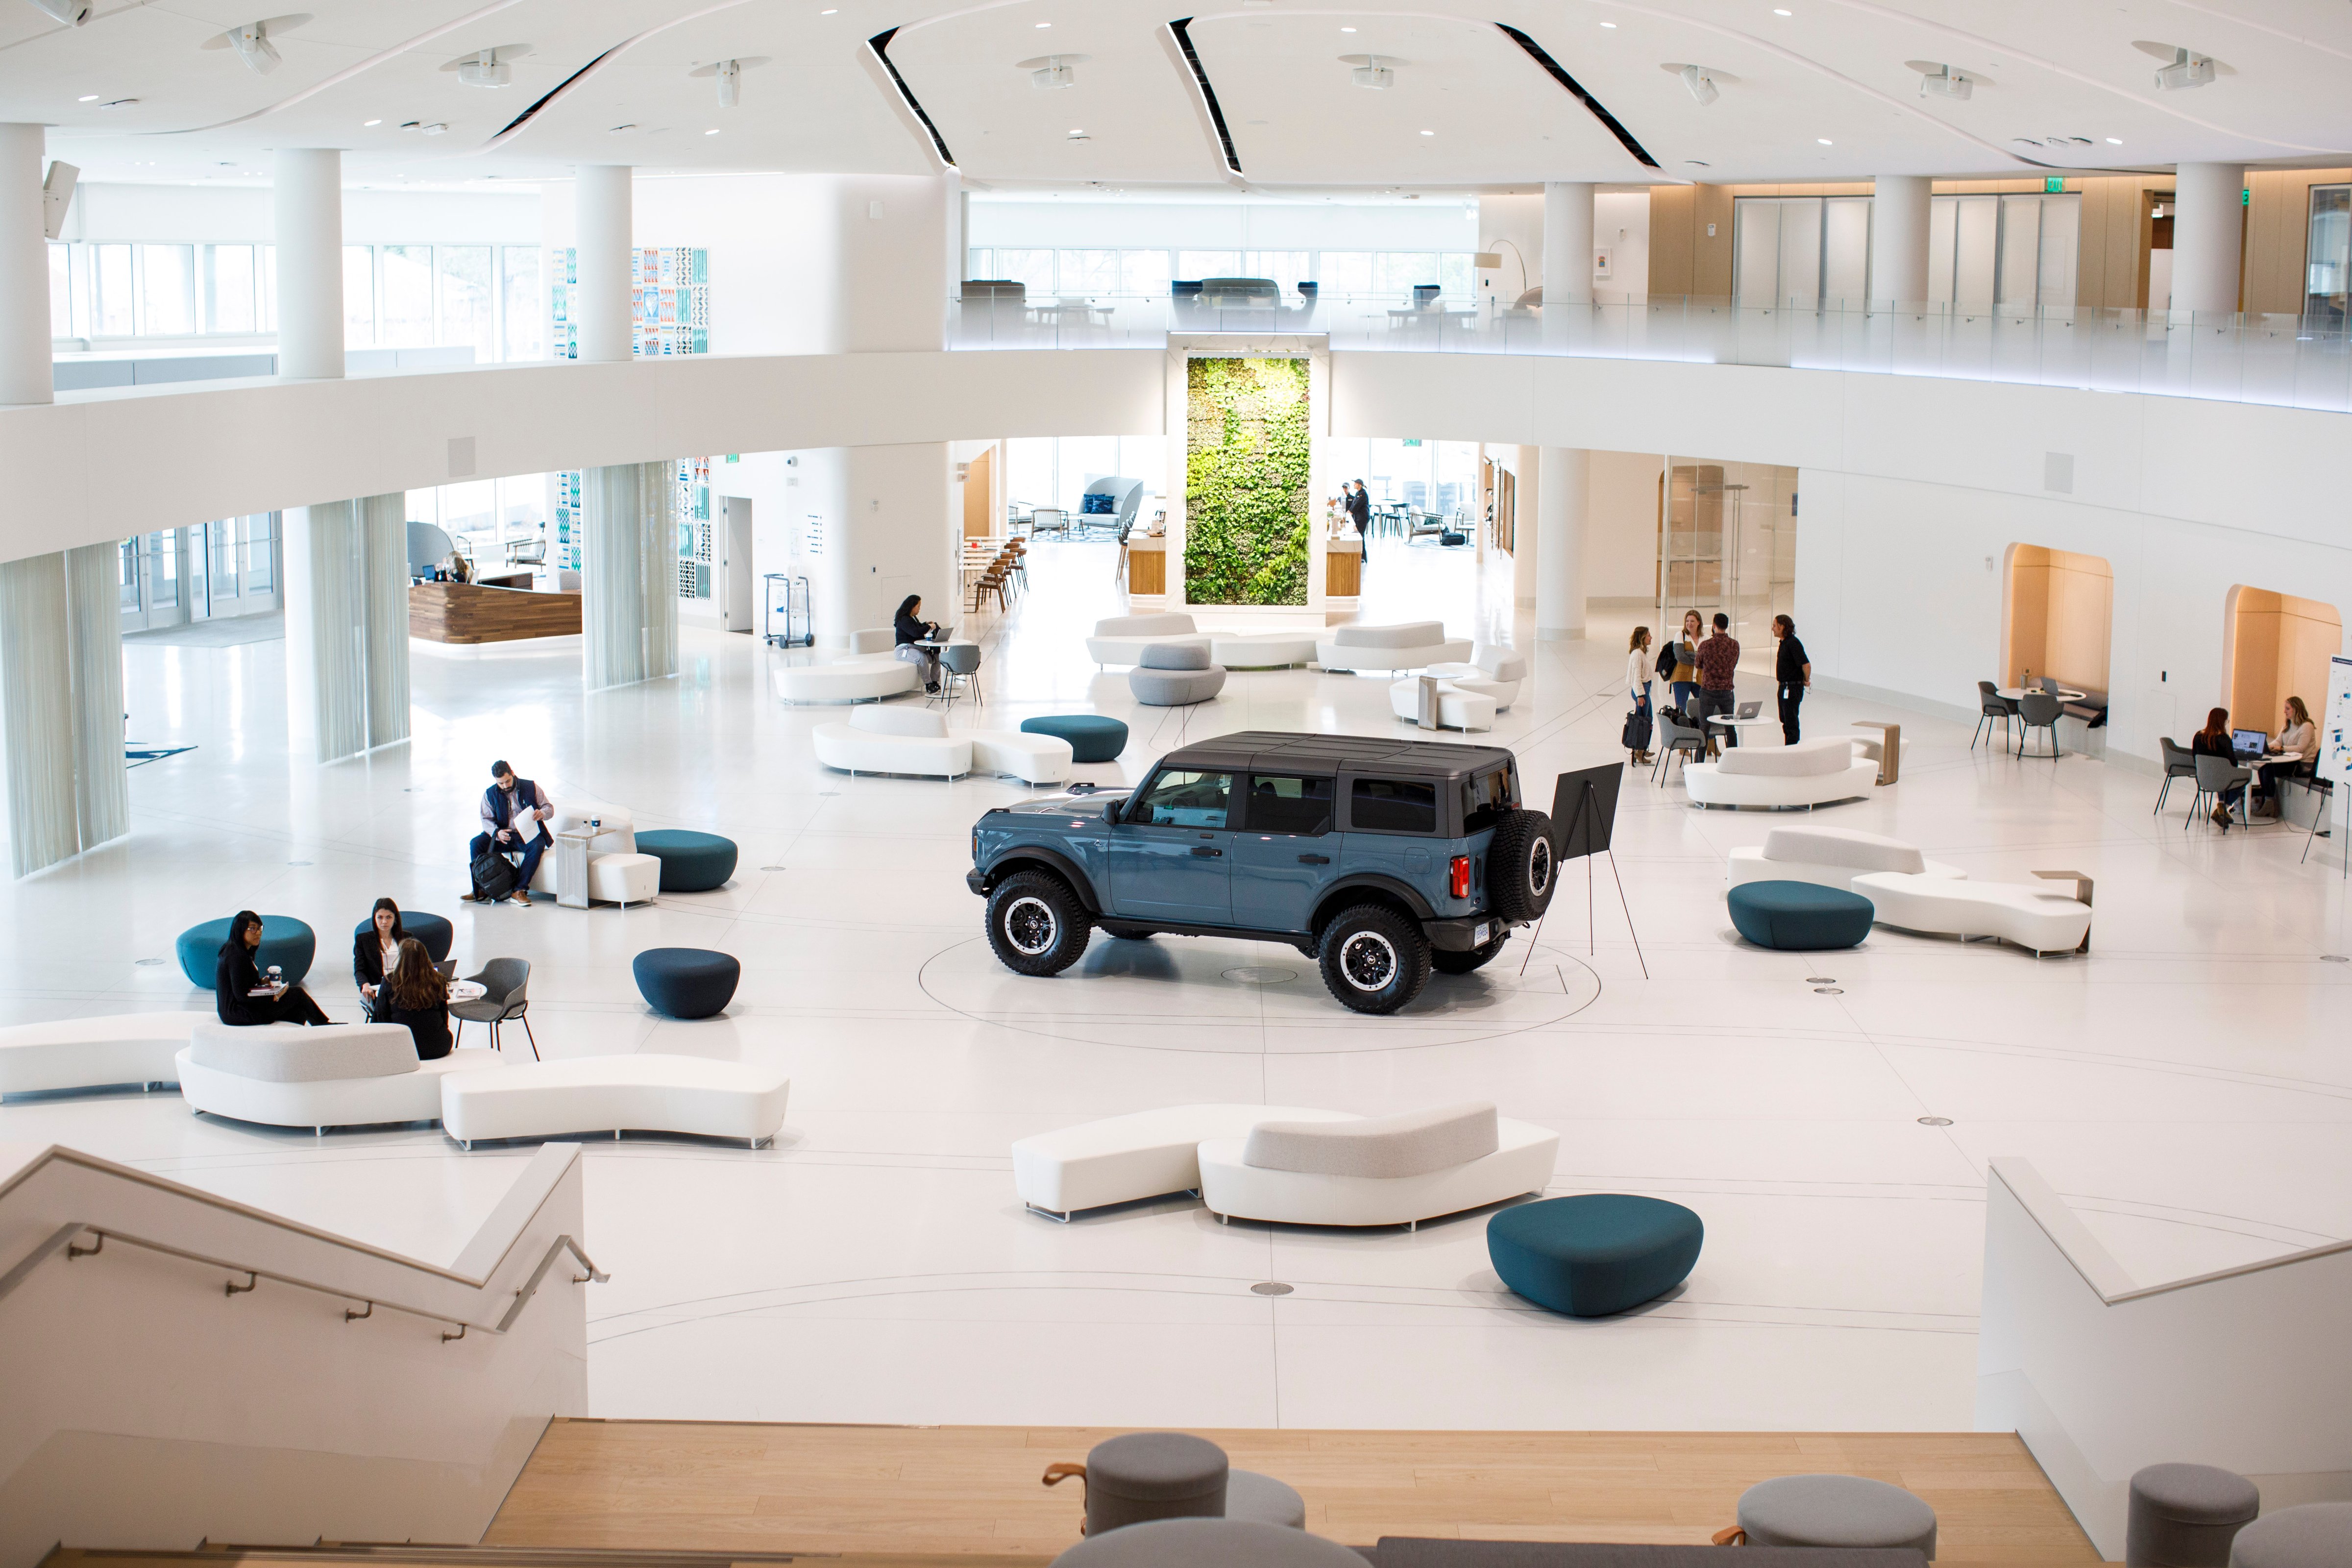 Ford has already converted roughly a third of its southeast Michigan workplaces into "collaboration centers." (Credit: Ford)